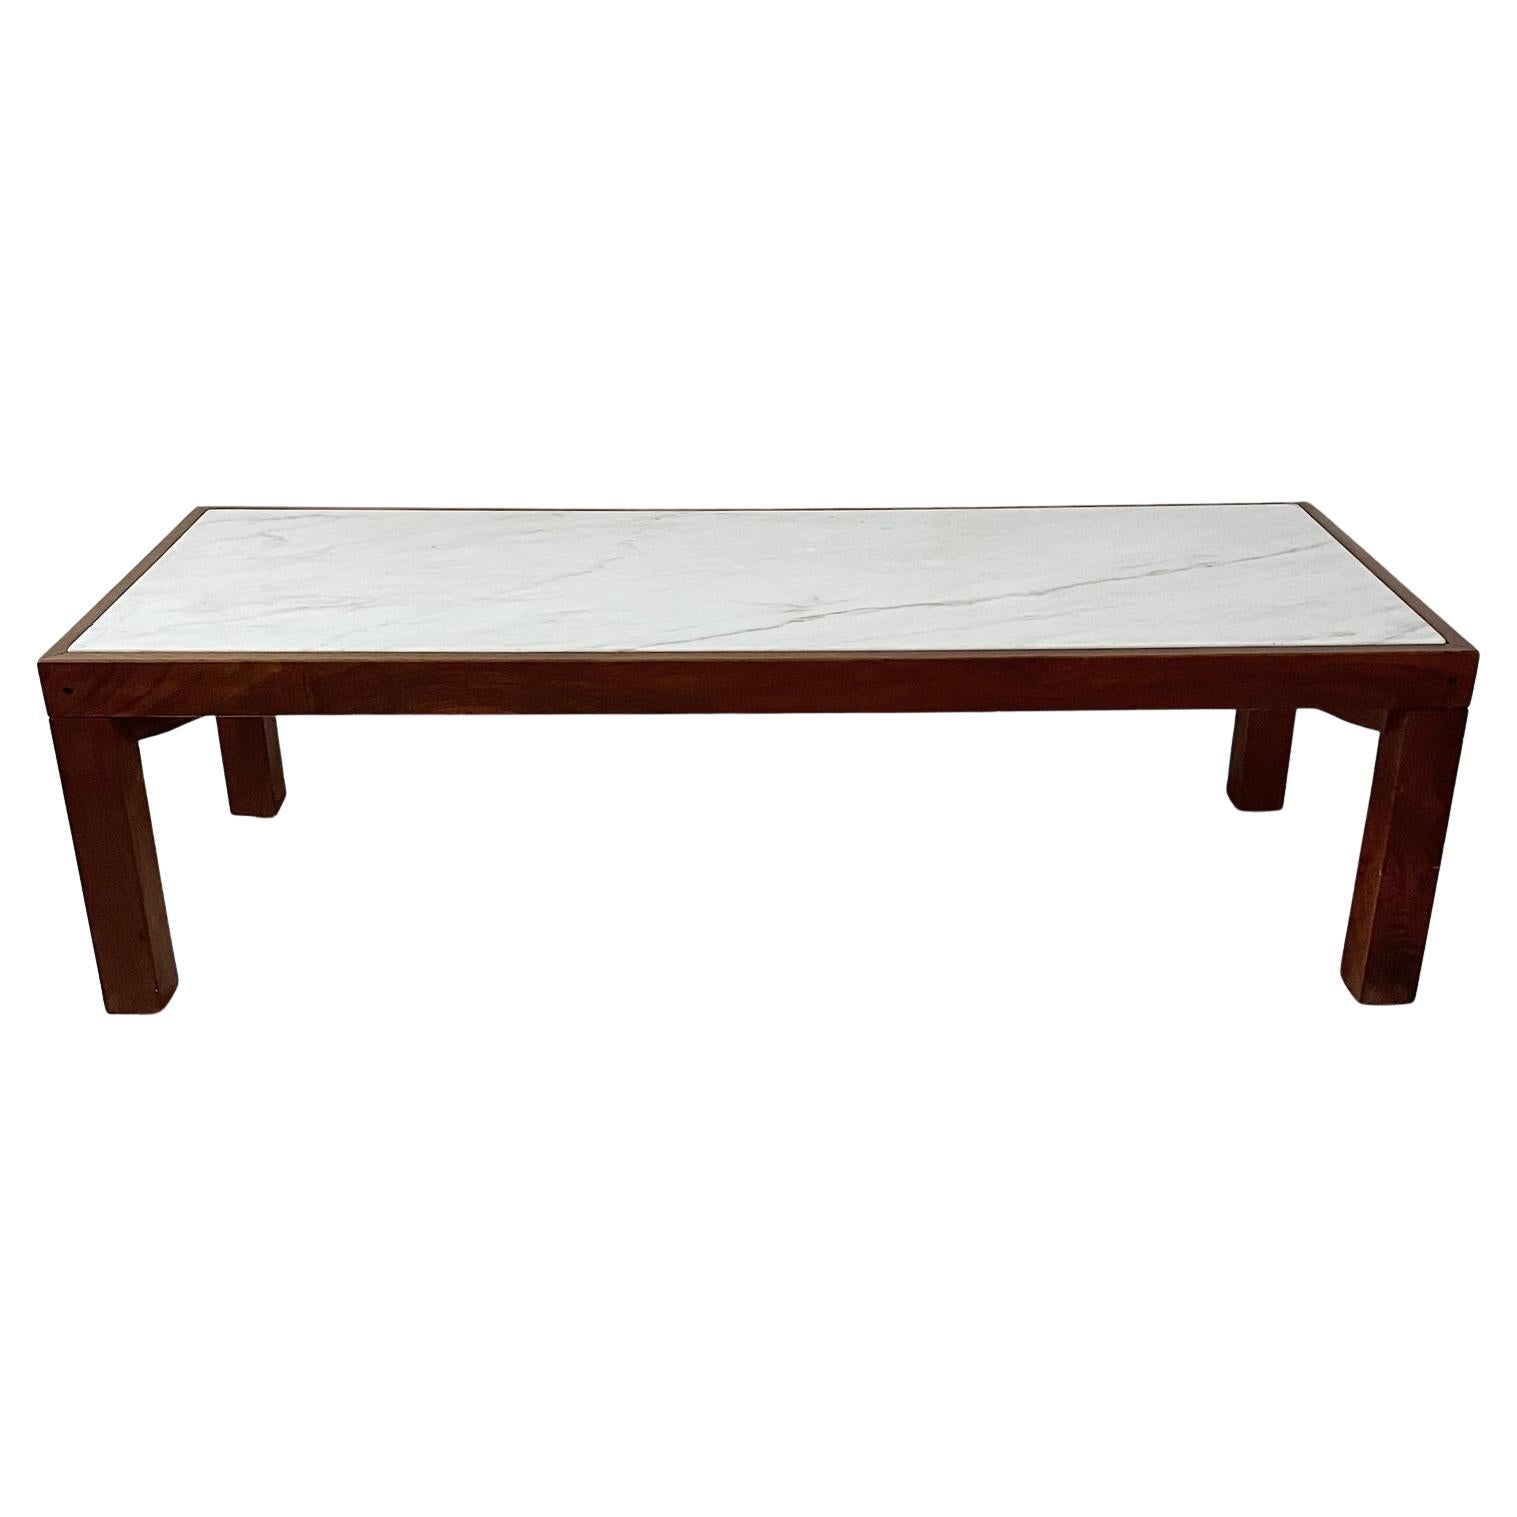 Rectangular Wood and White Marble Vintage Coffee Table